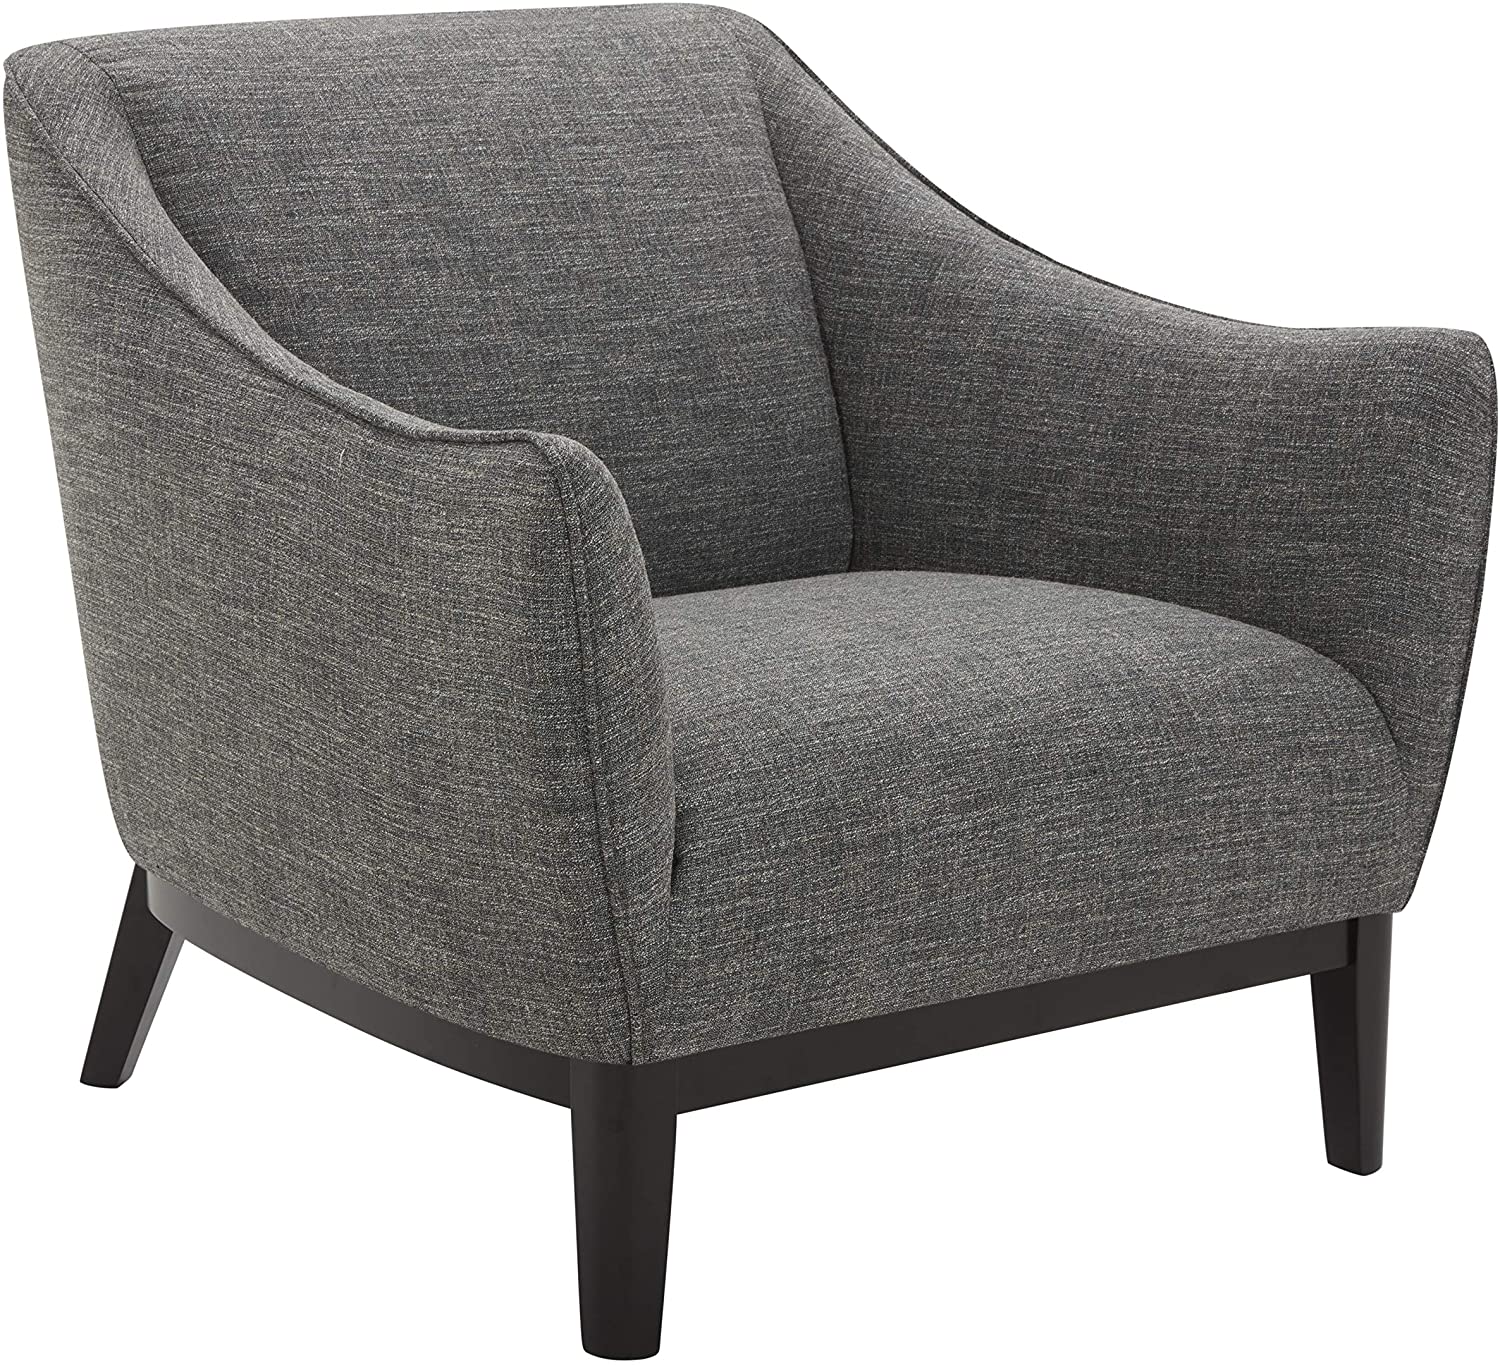 Sofa Chair: Dark Grey Chair with Curved Armrests